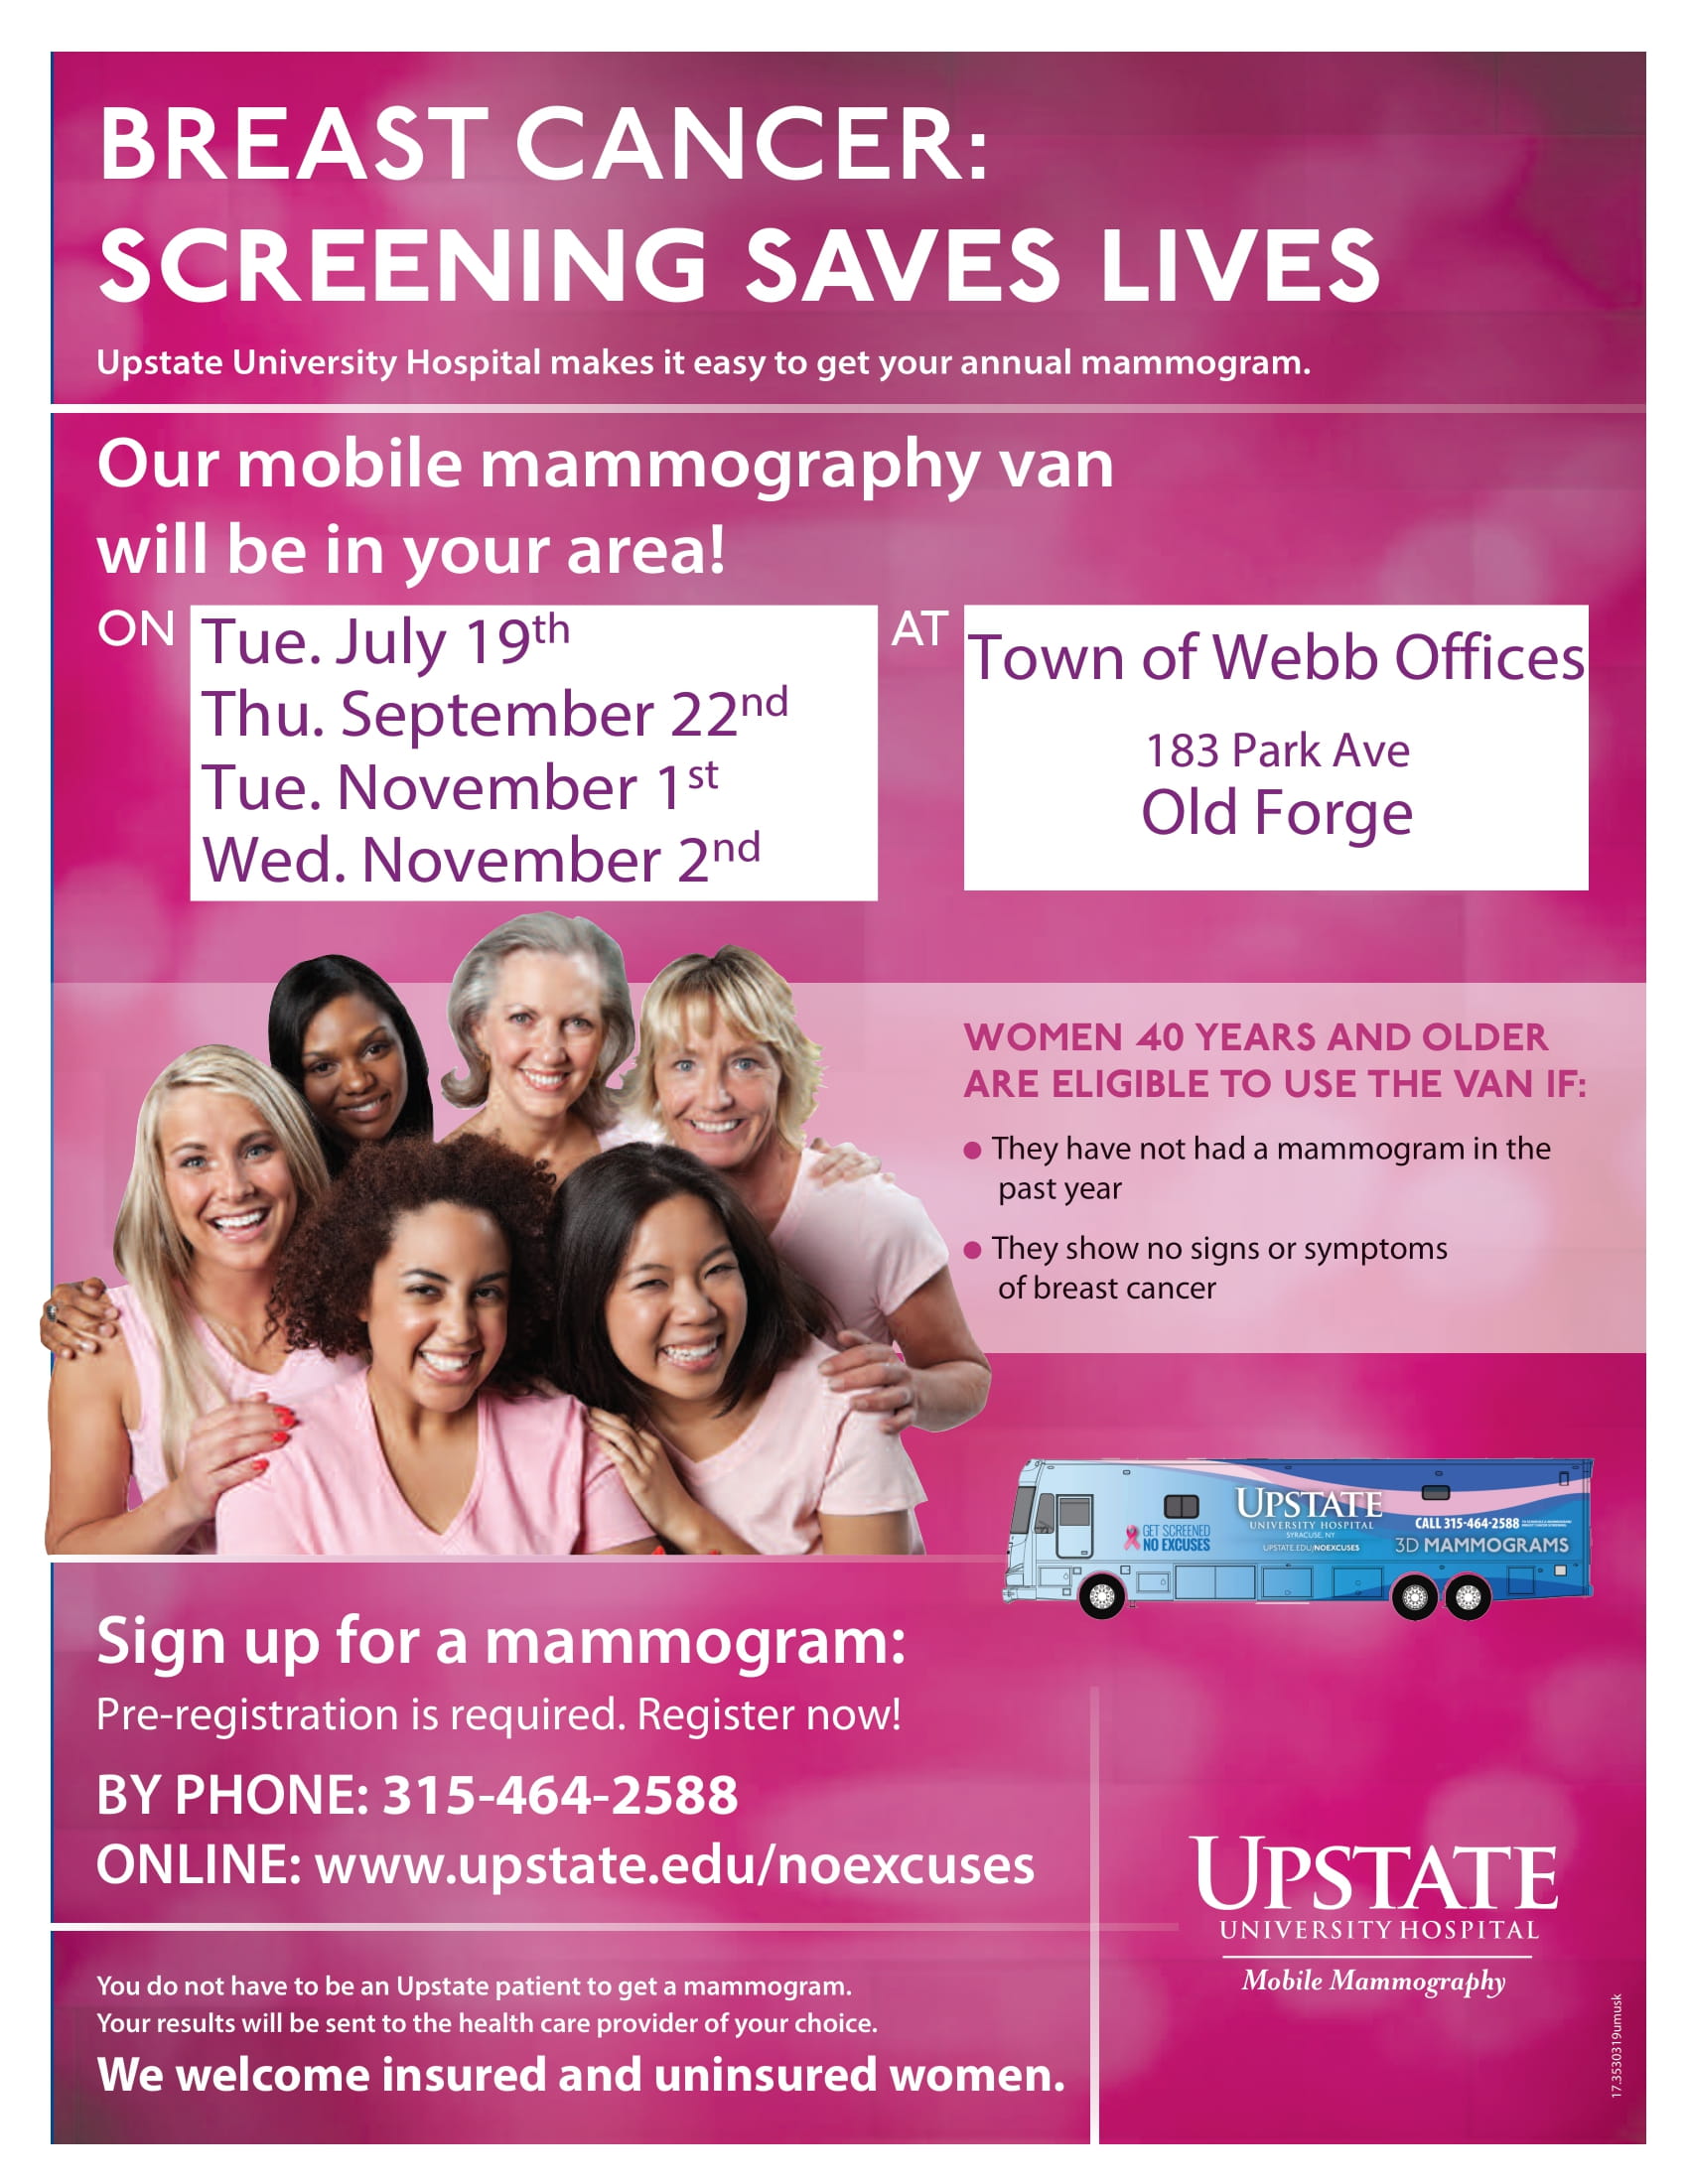 Upstate Medical University Mobile Mammography Services